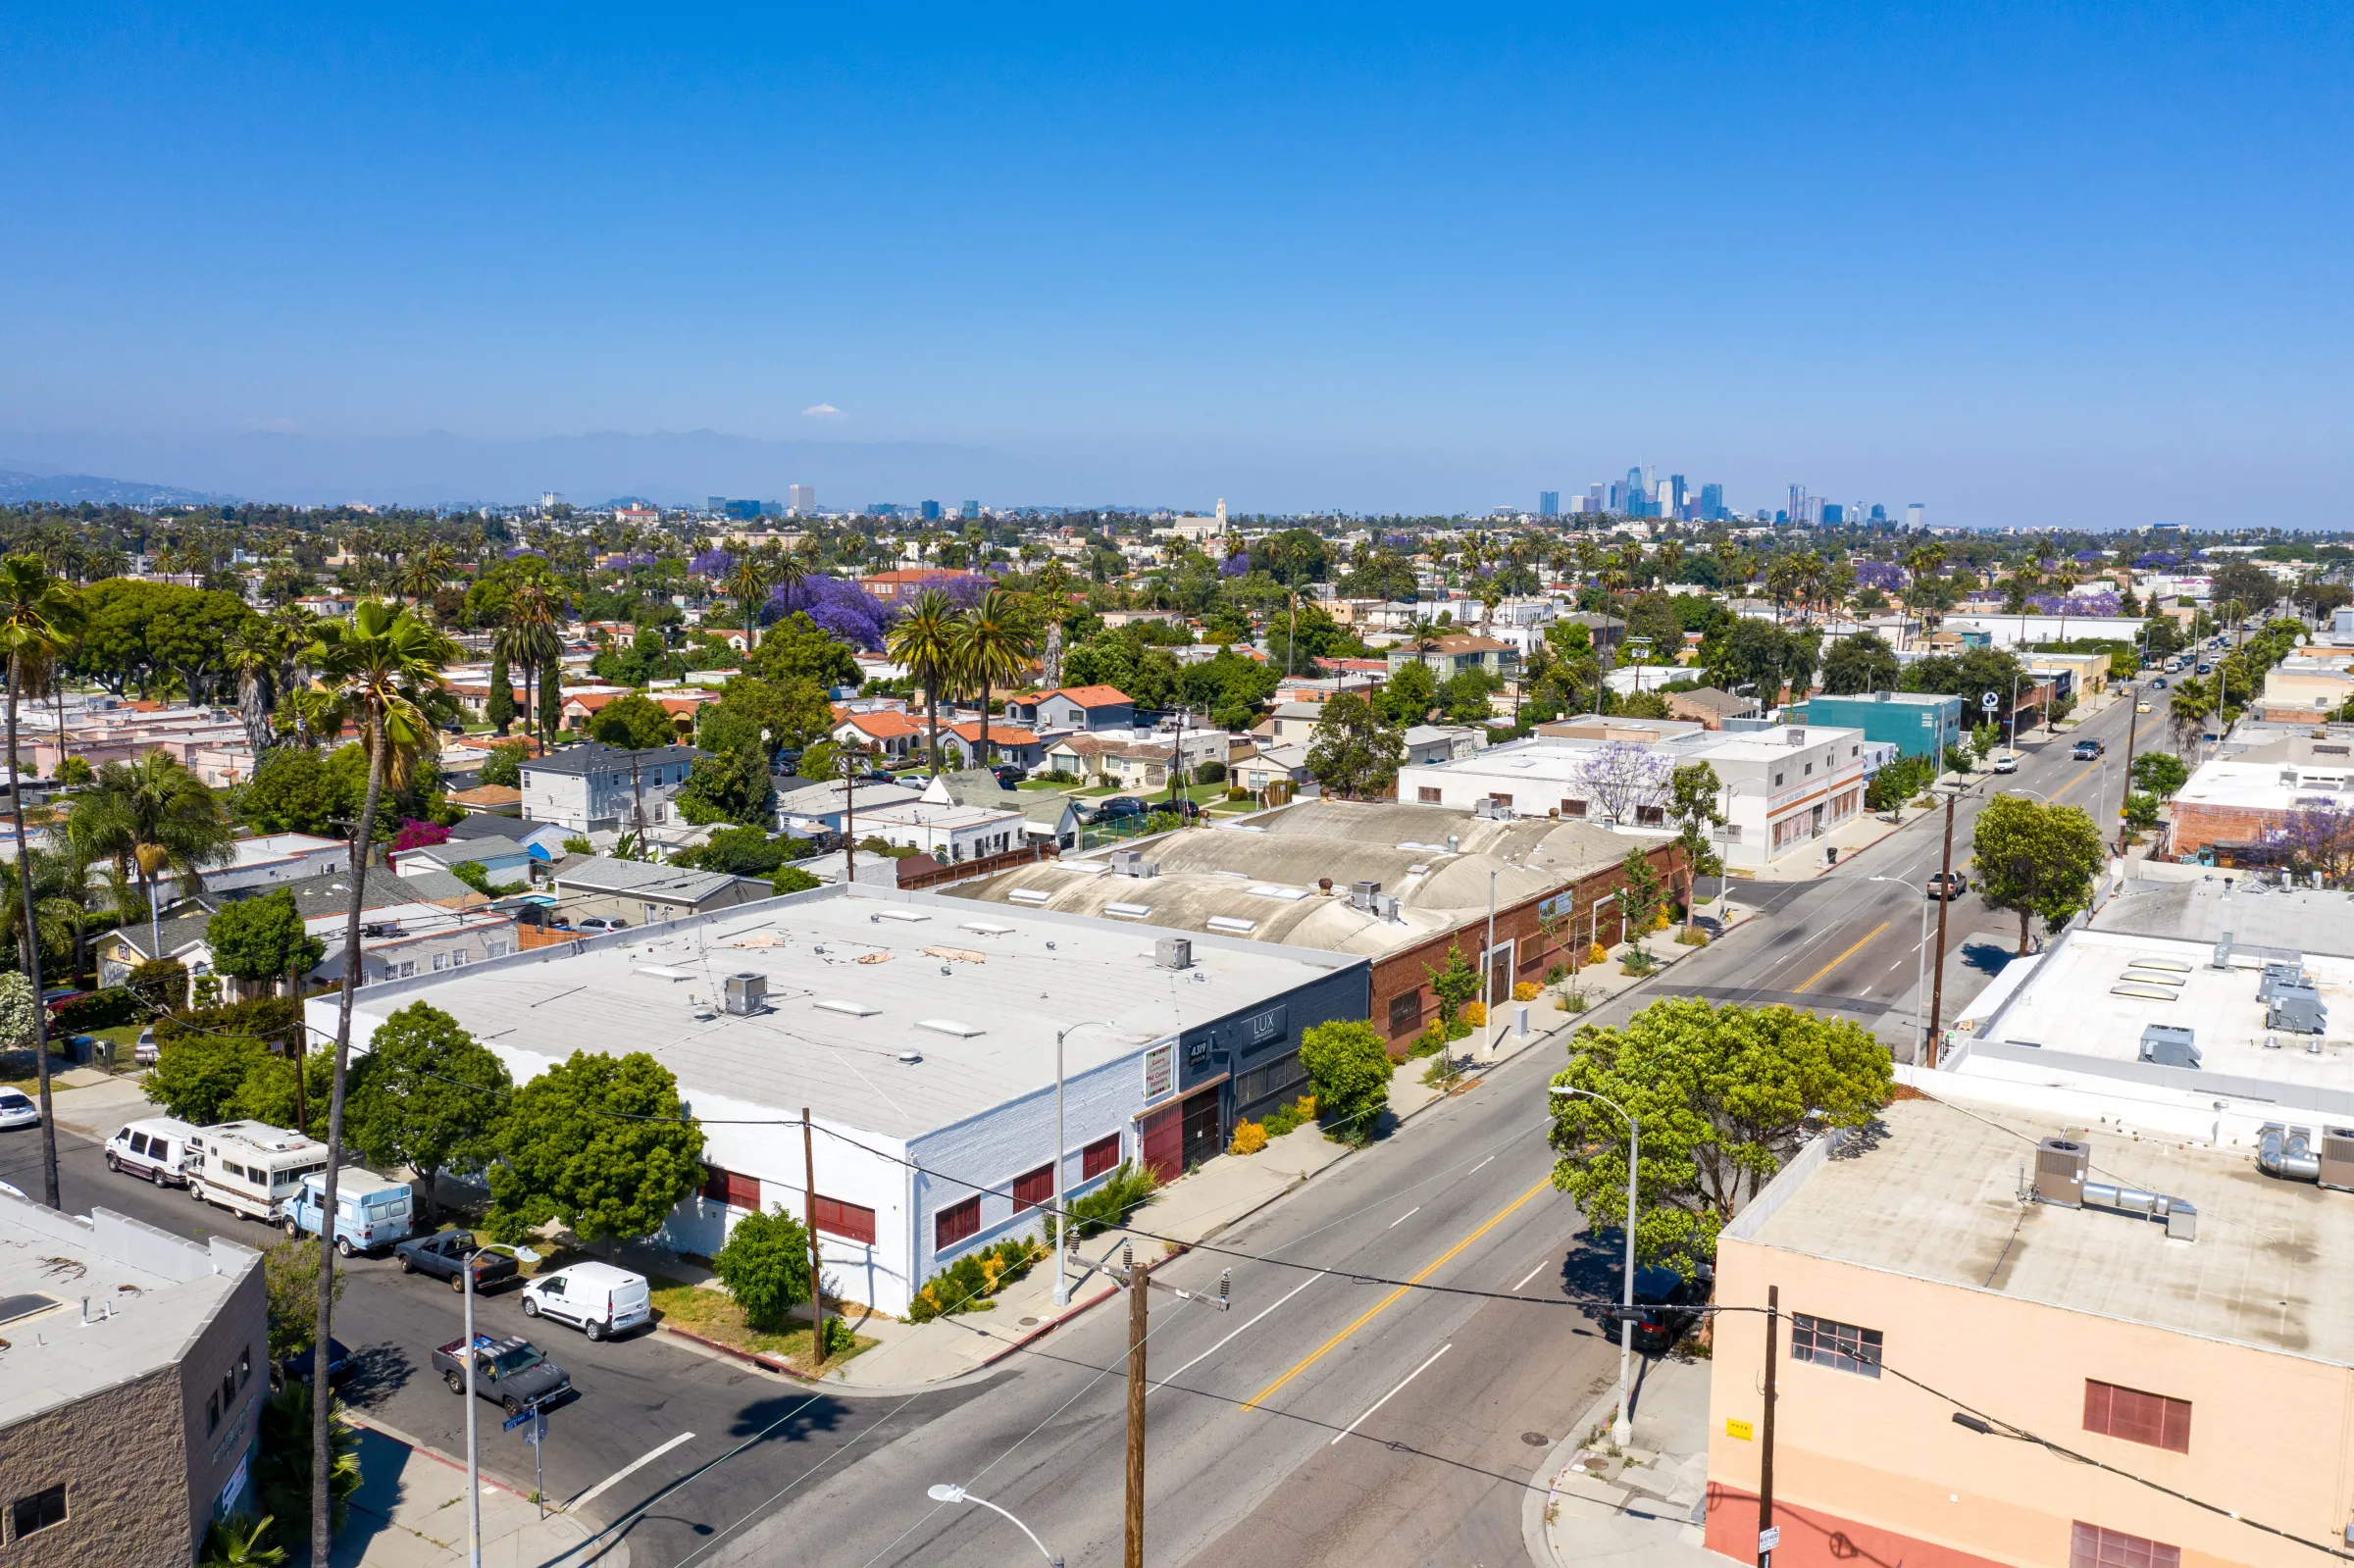 Buildings along West Jefferson Boulevard in Los Angeles being redeveloped through a crowdfunded campaign by Fundrise